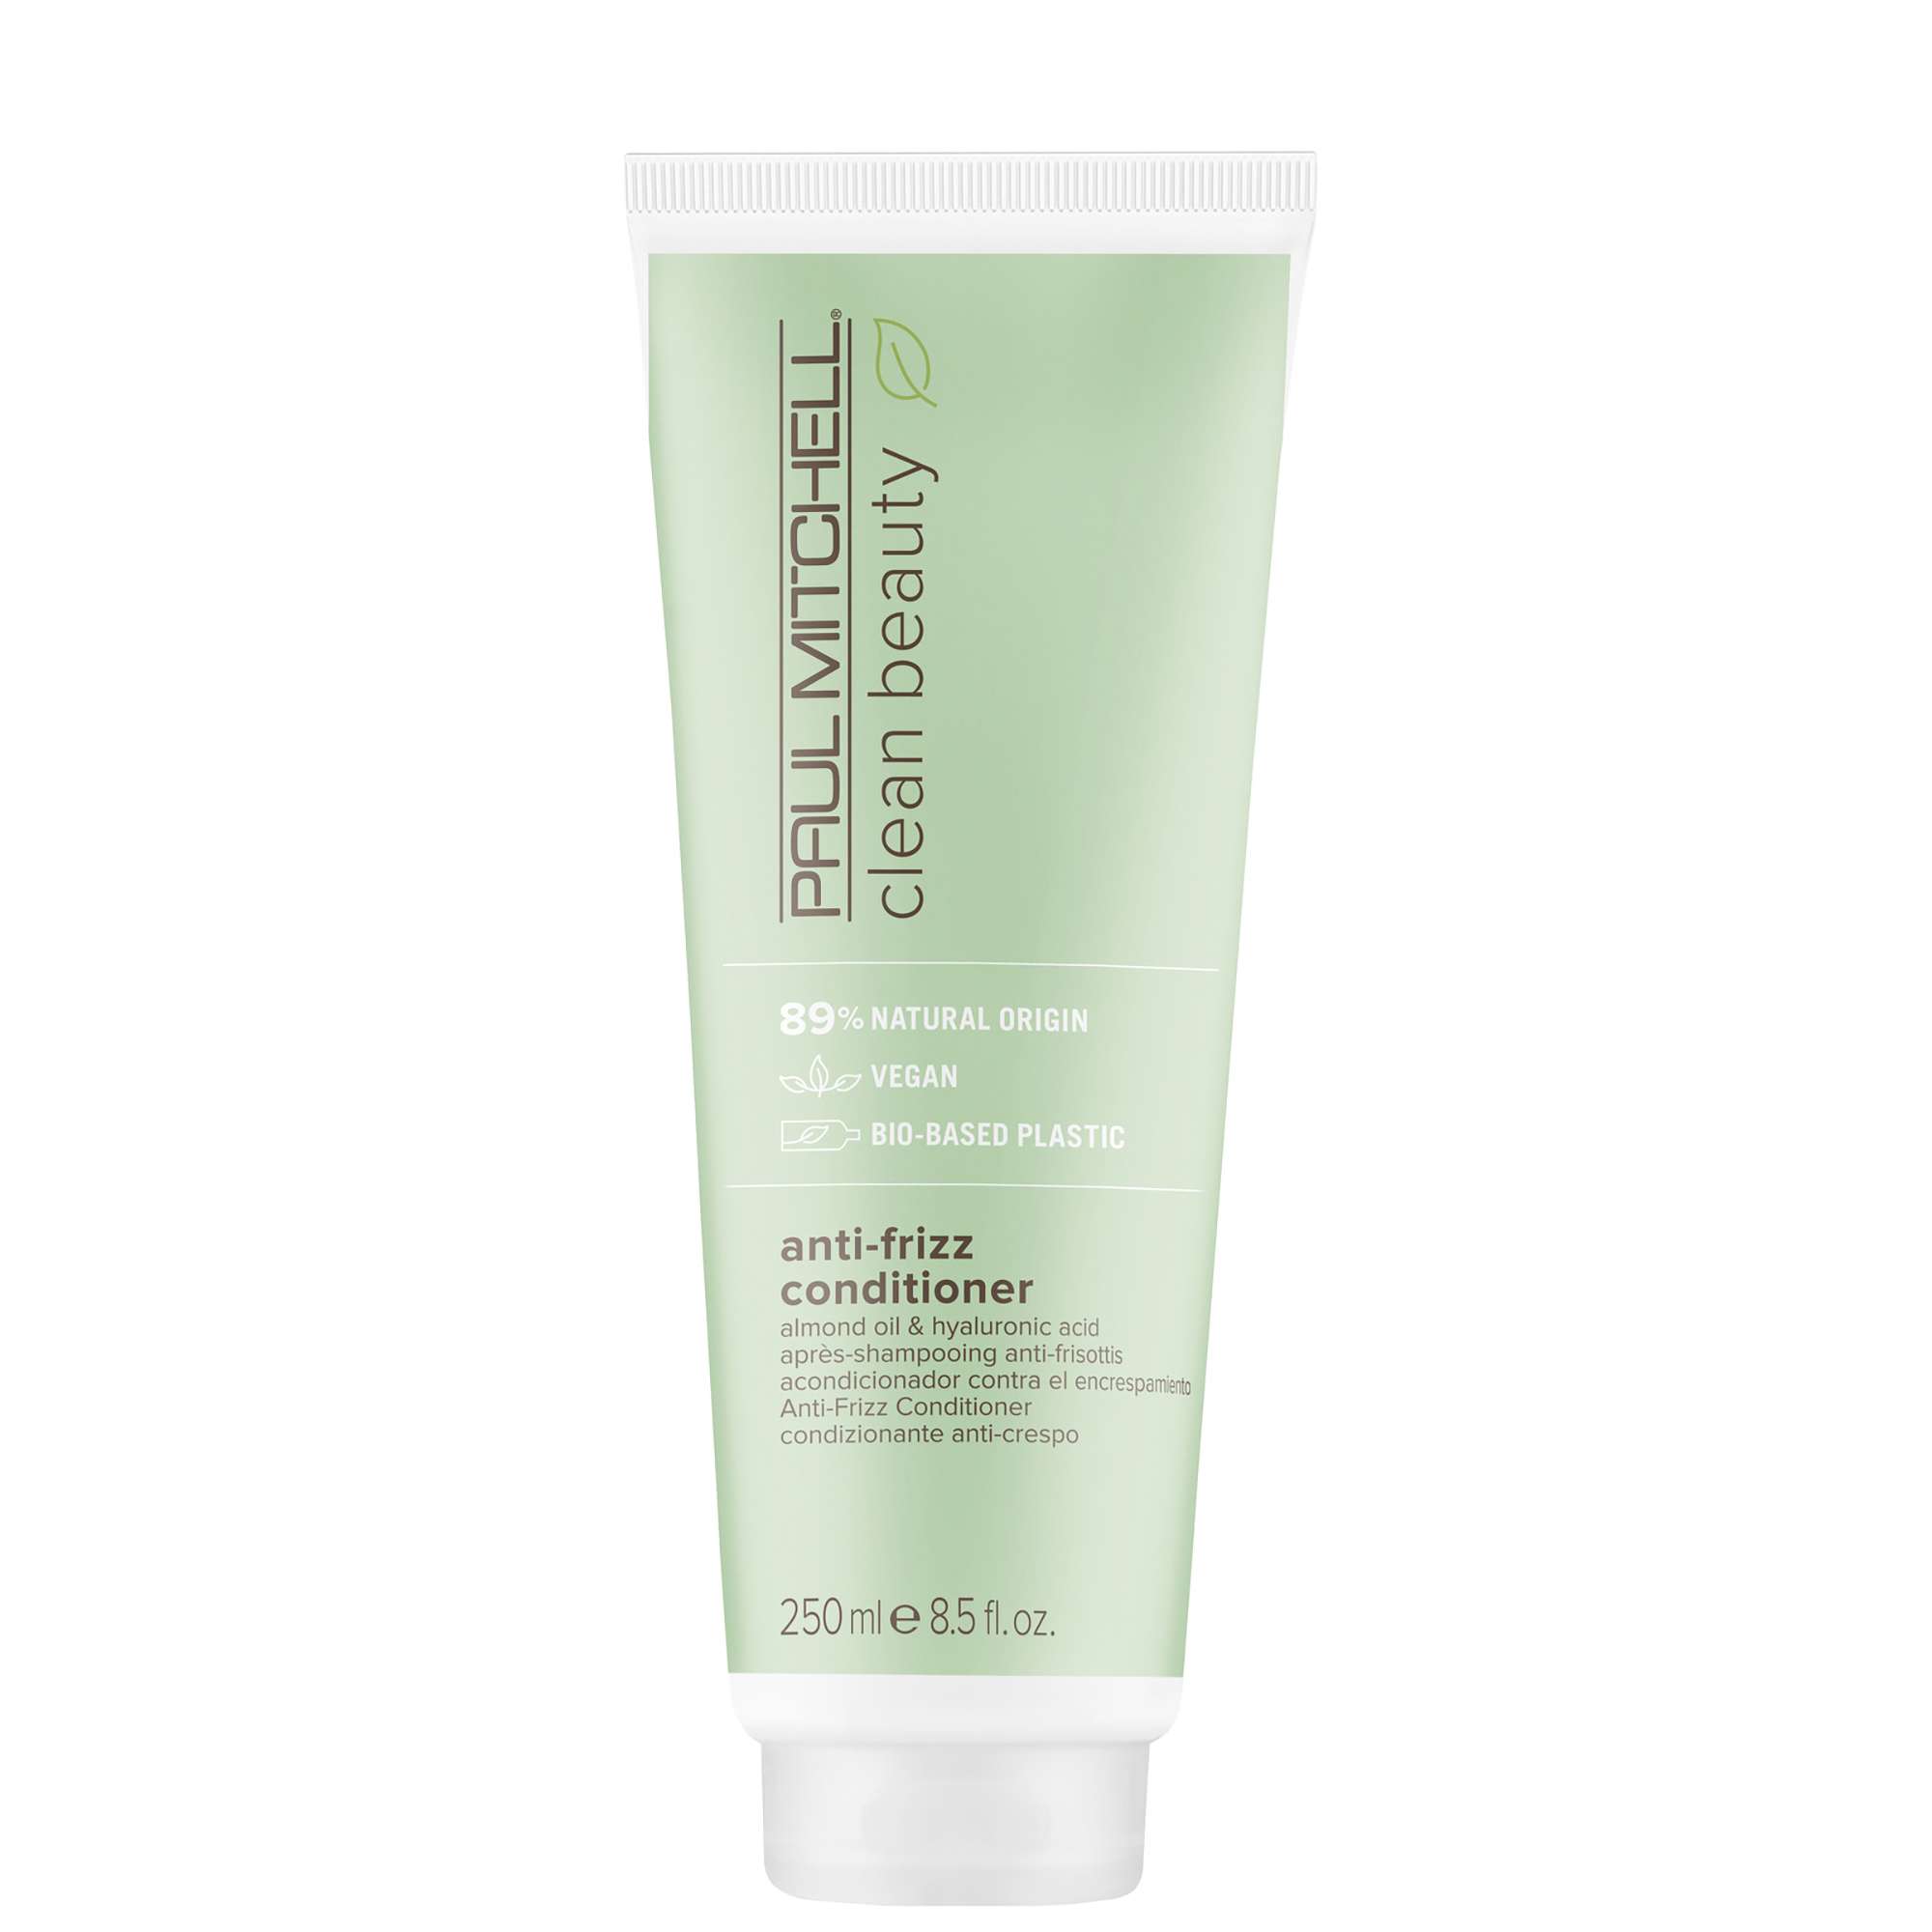 Image of Paul Mitchell Clean Beauty Anti-Frizz Conditioner 250ml